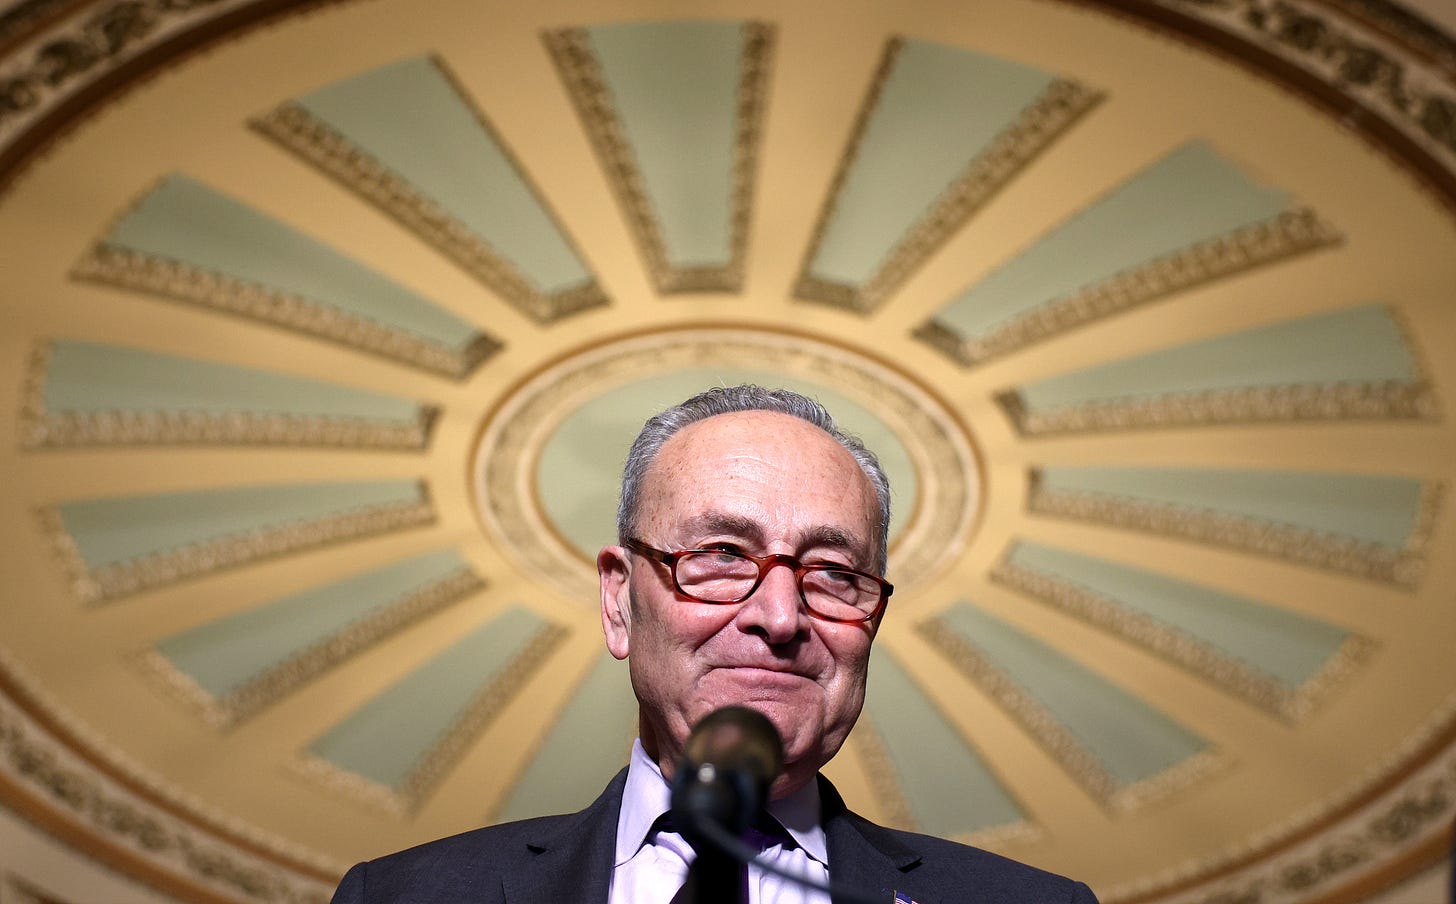 Senate Majority Leader Chuck Schumer, talking to reporters during infrastructure negotiations. (Photo: Getty Images)